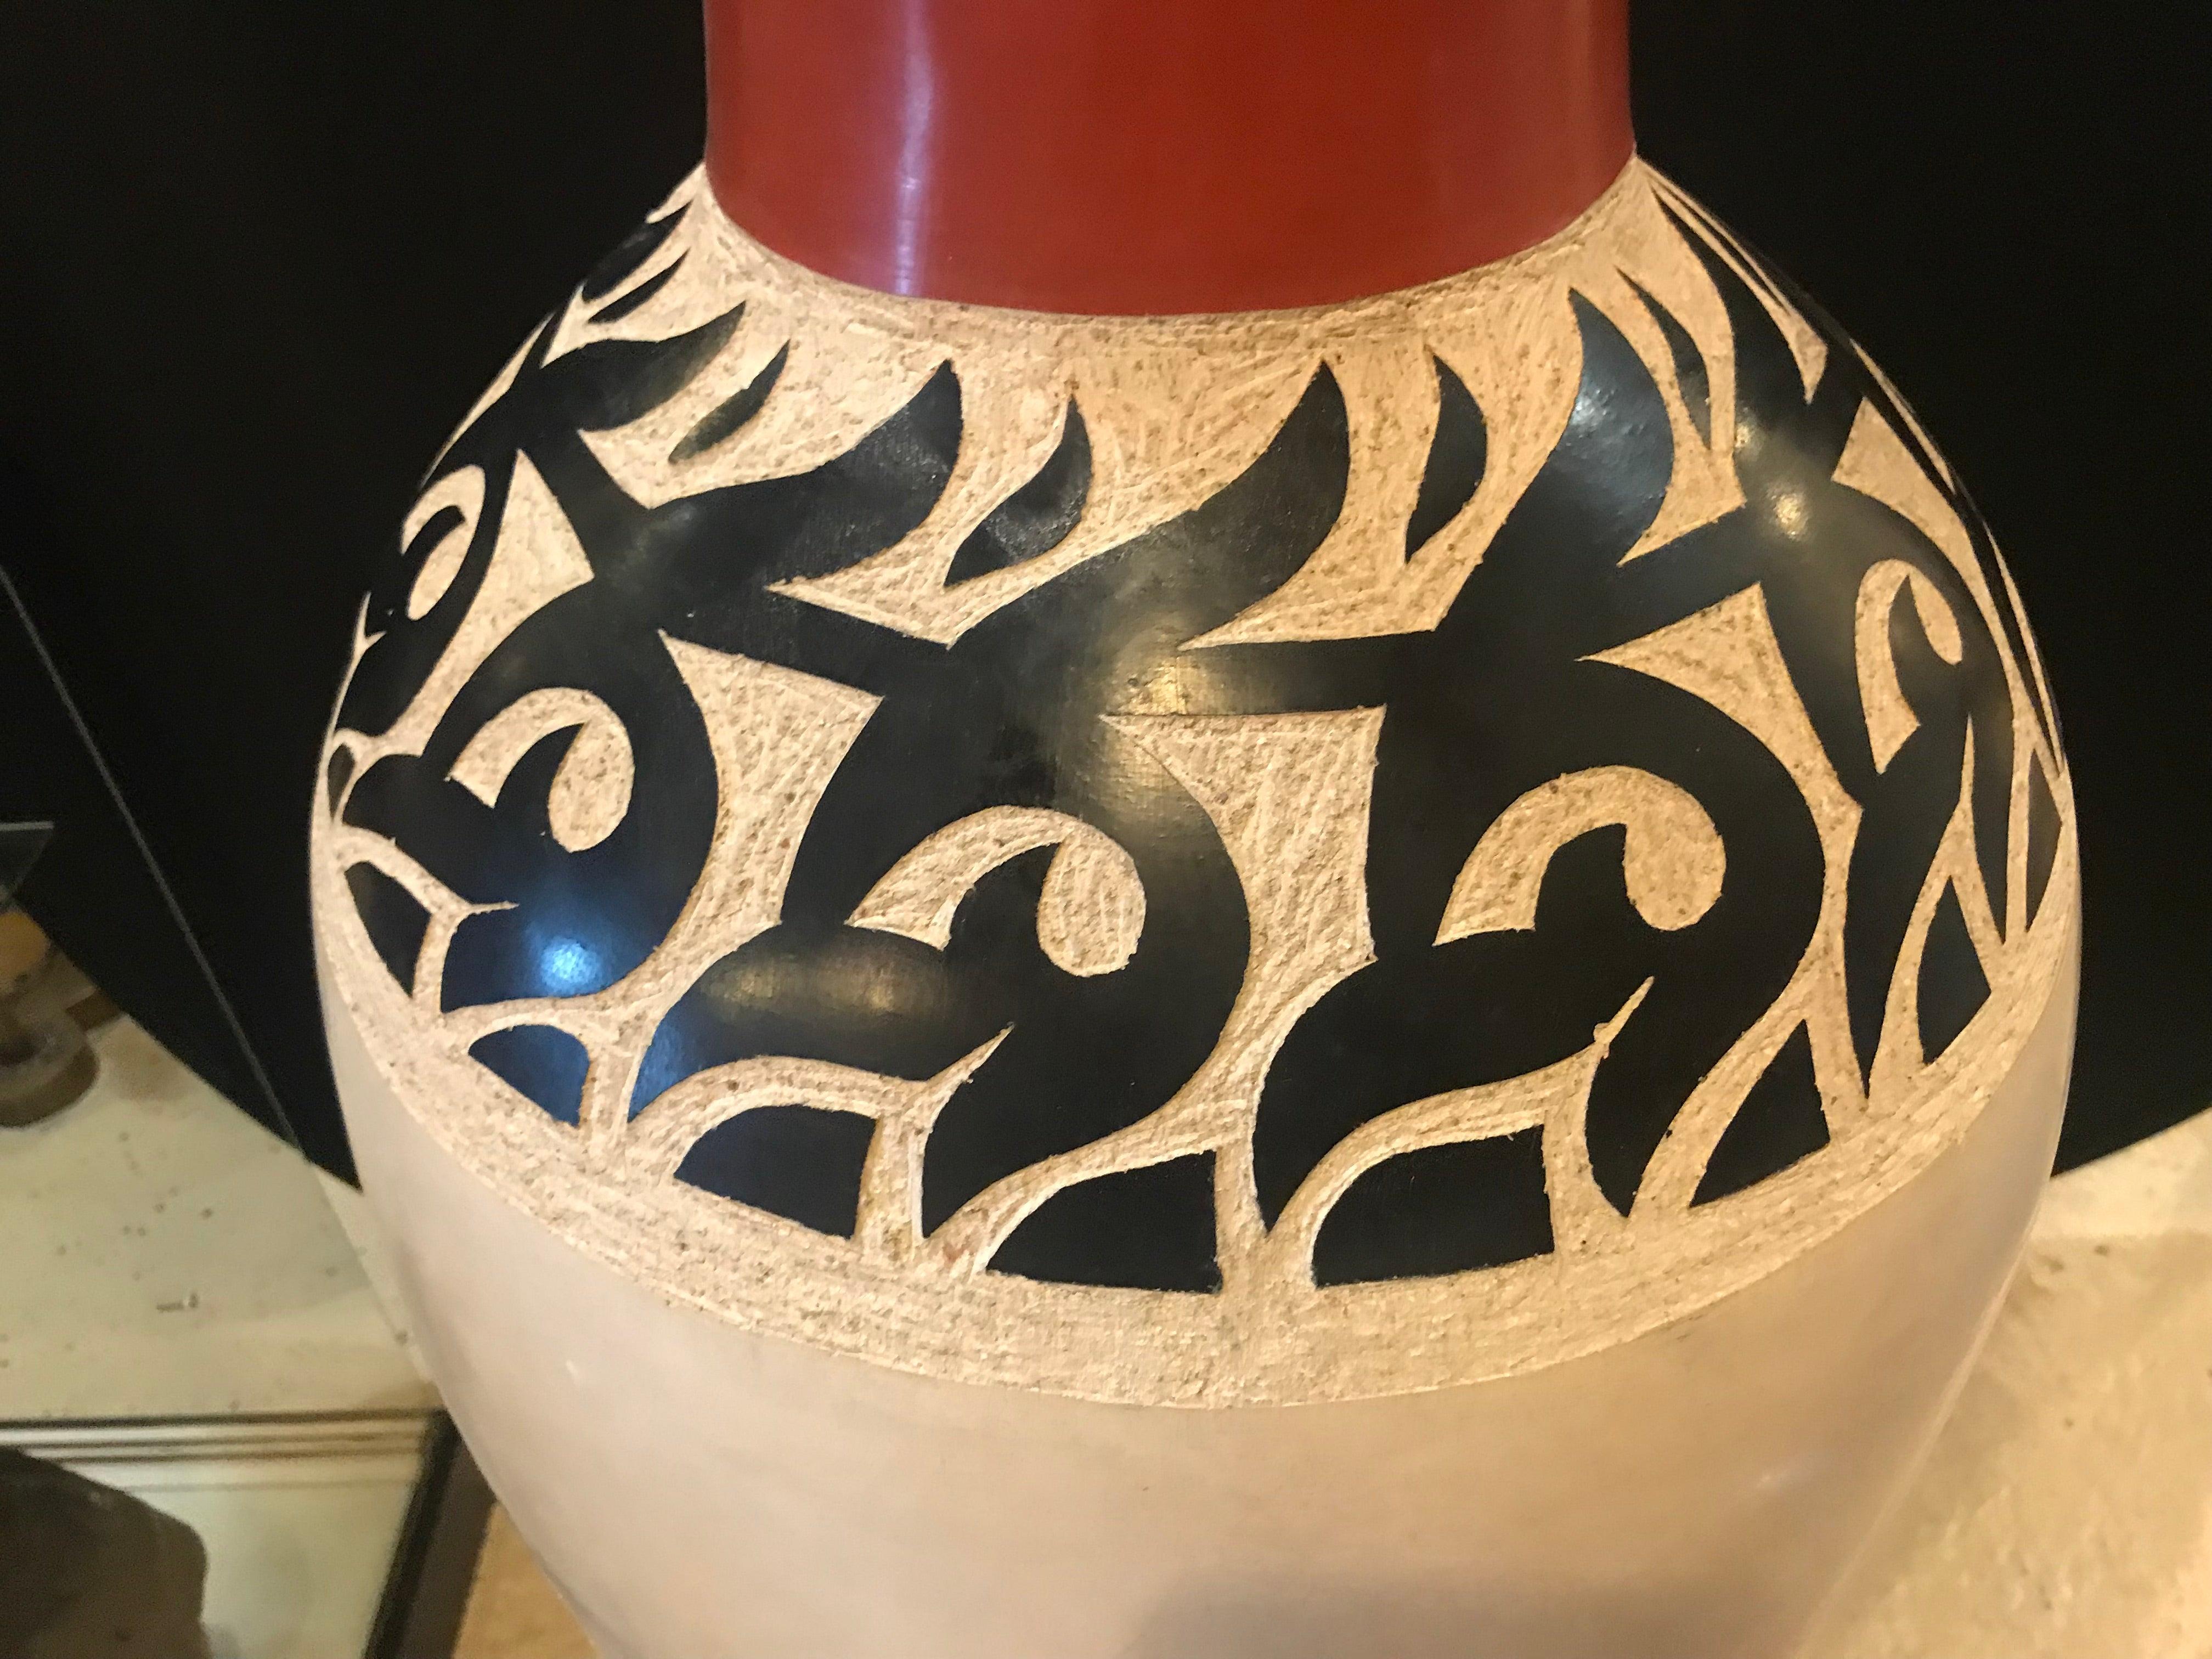 Late 20th Century Monumental Moroccan Pottery Vase or Urn Handmade in Red and White, a Pair